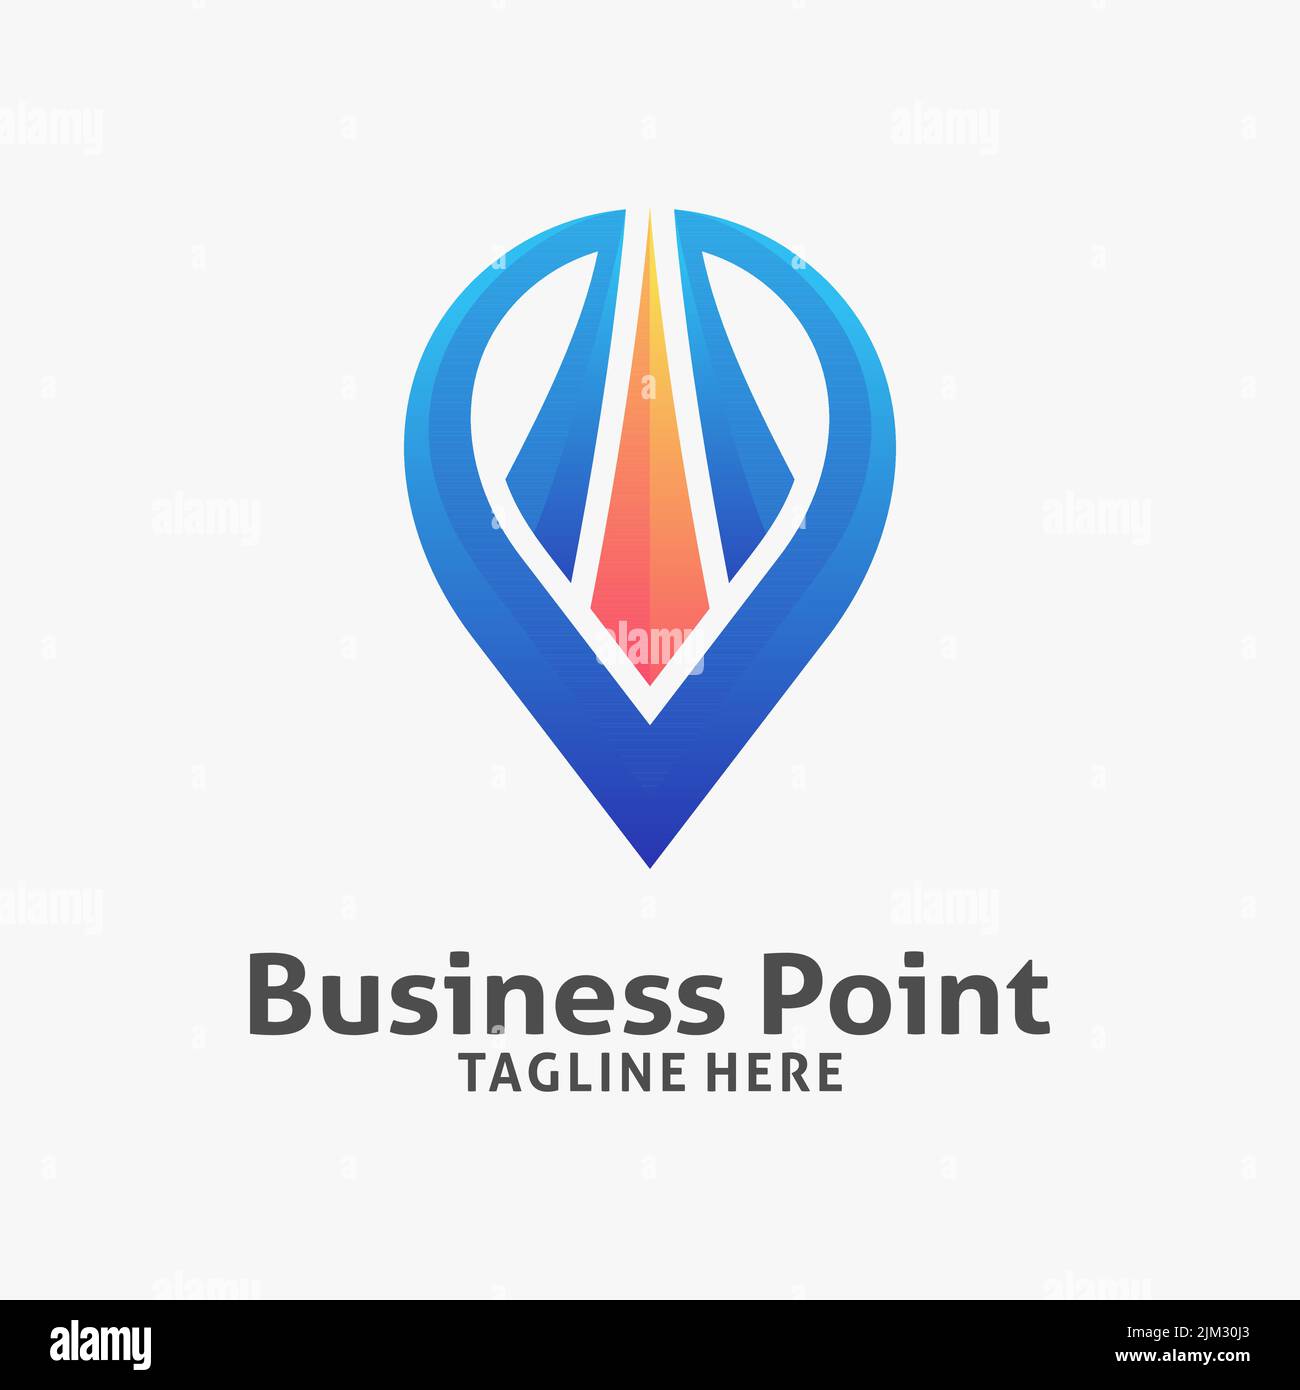 Business place point logo design Stock Vector